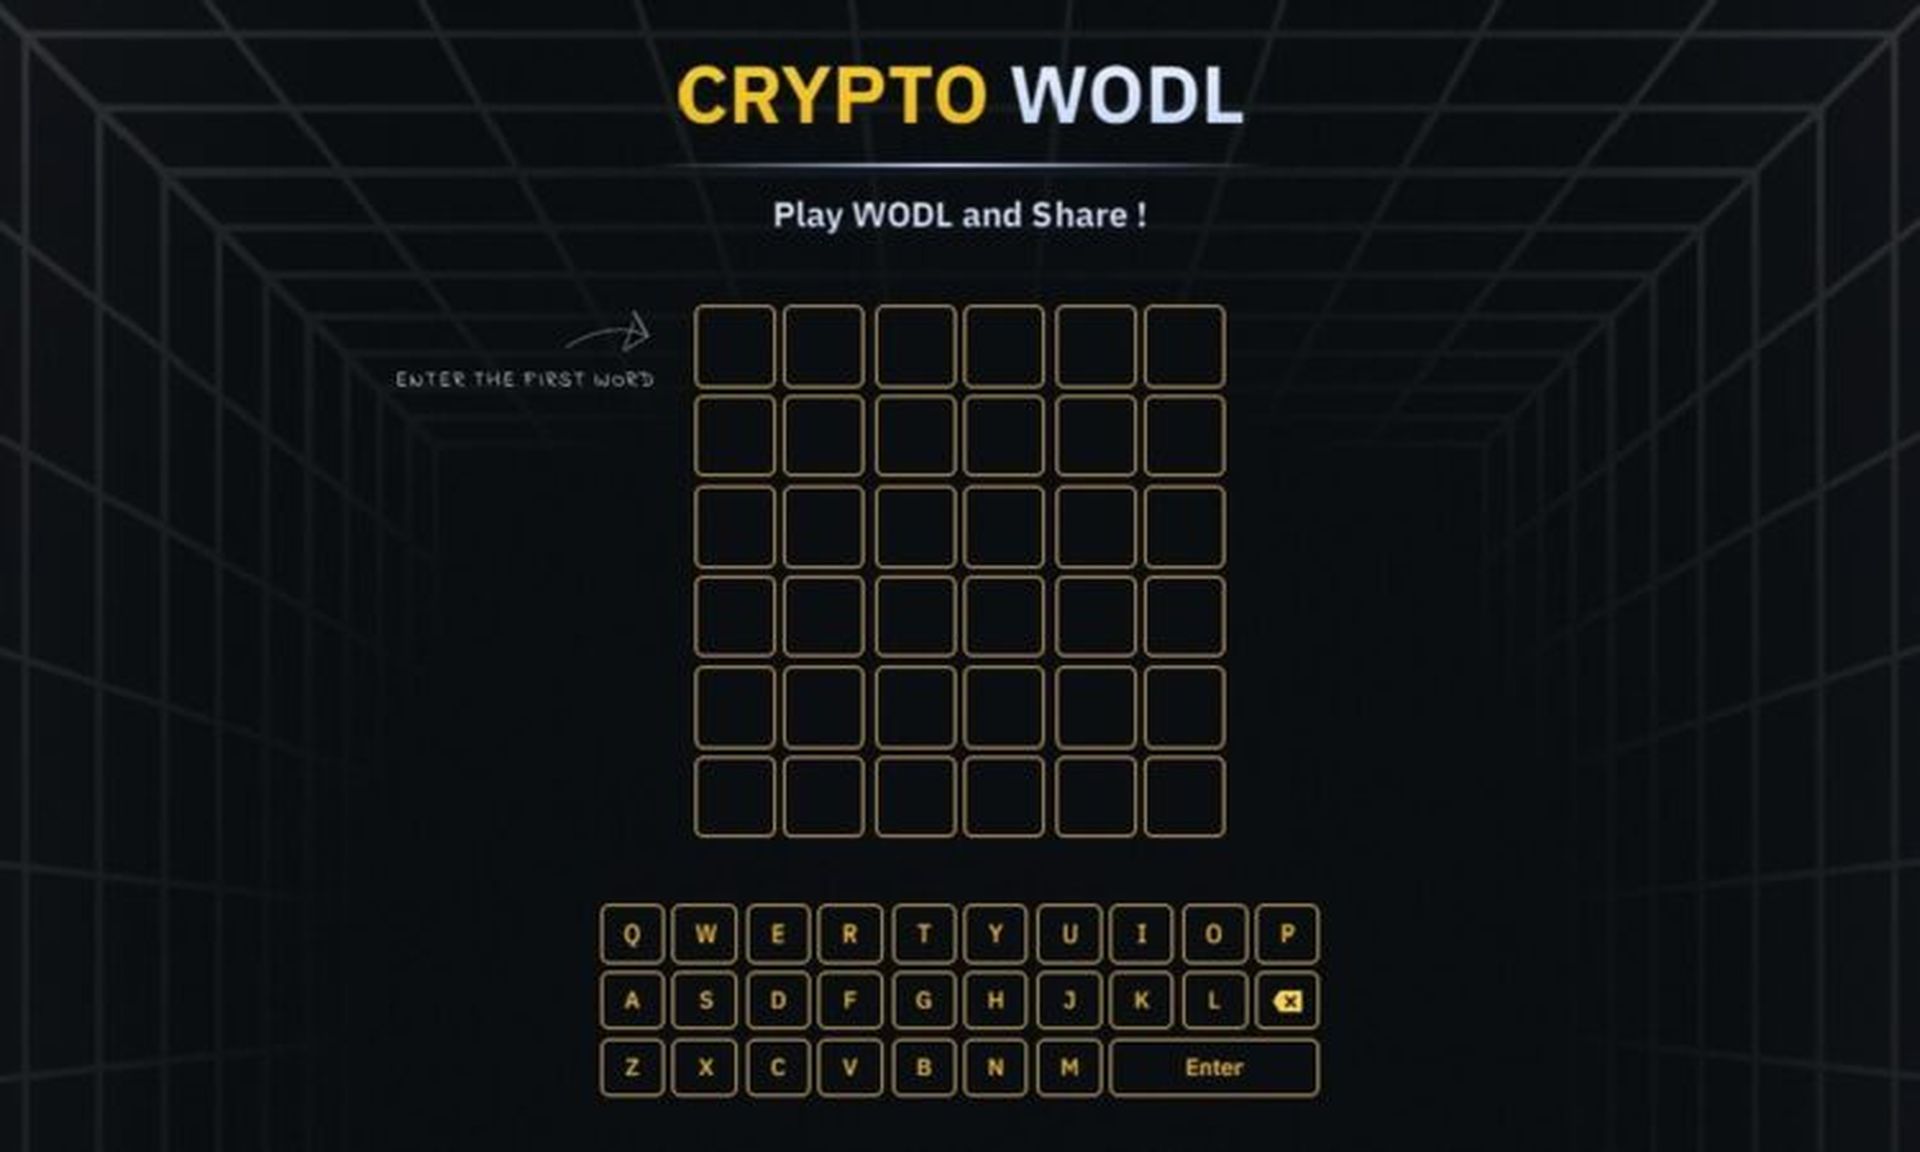 Binance Crypto WODL answers must be inserted into their quiz-like box on their site